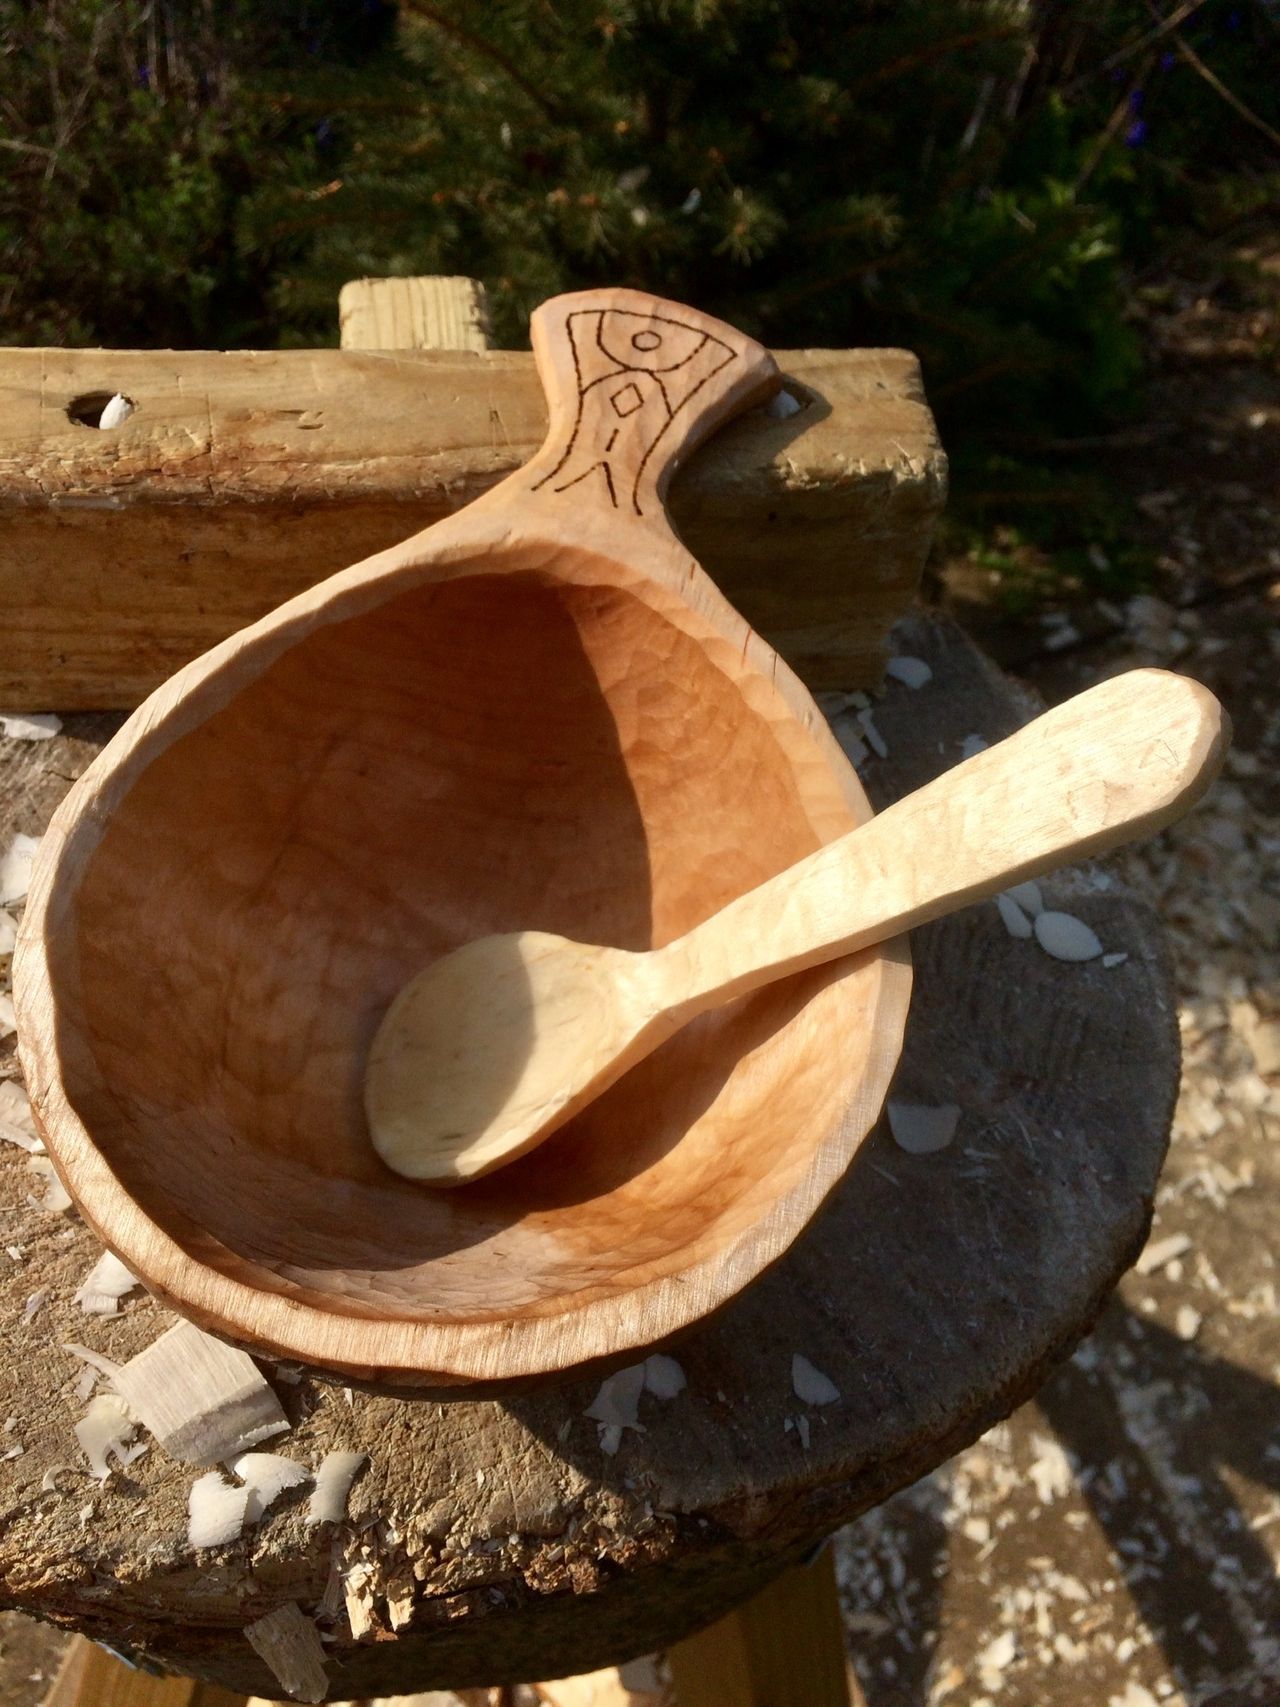 Gourd Kuksa: a new product